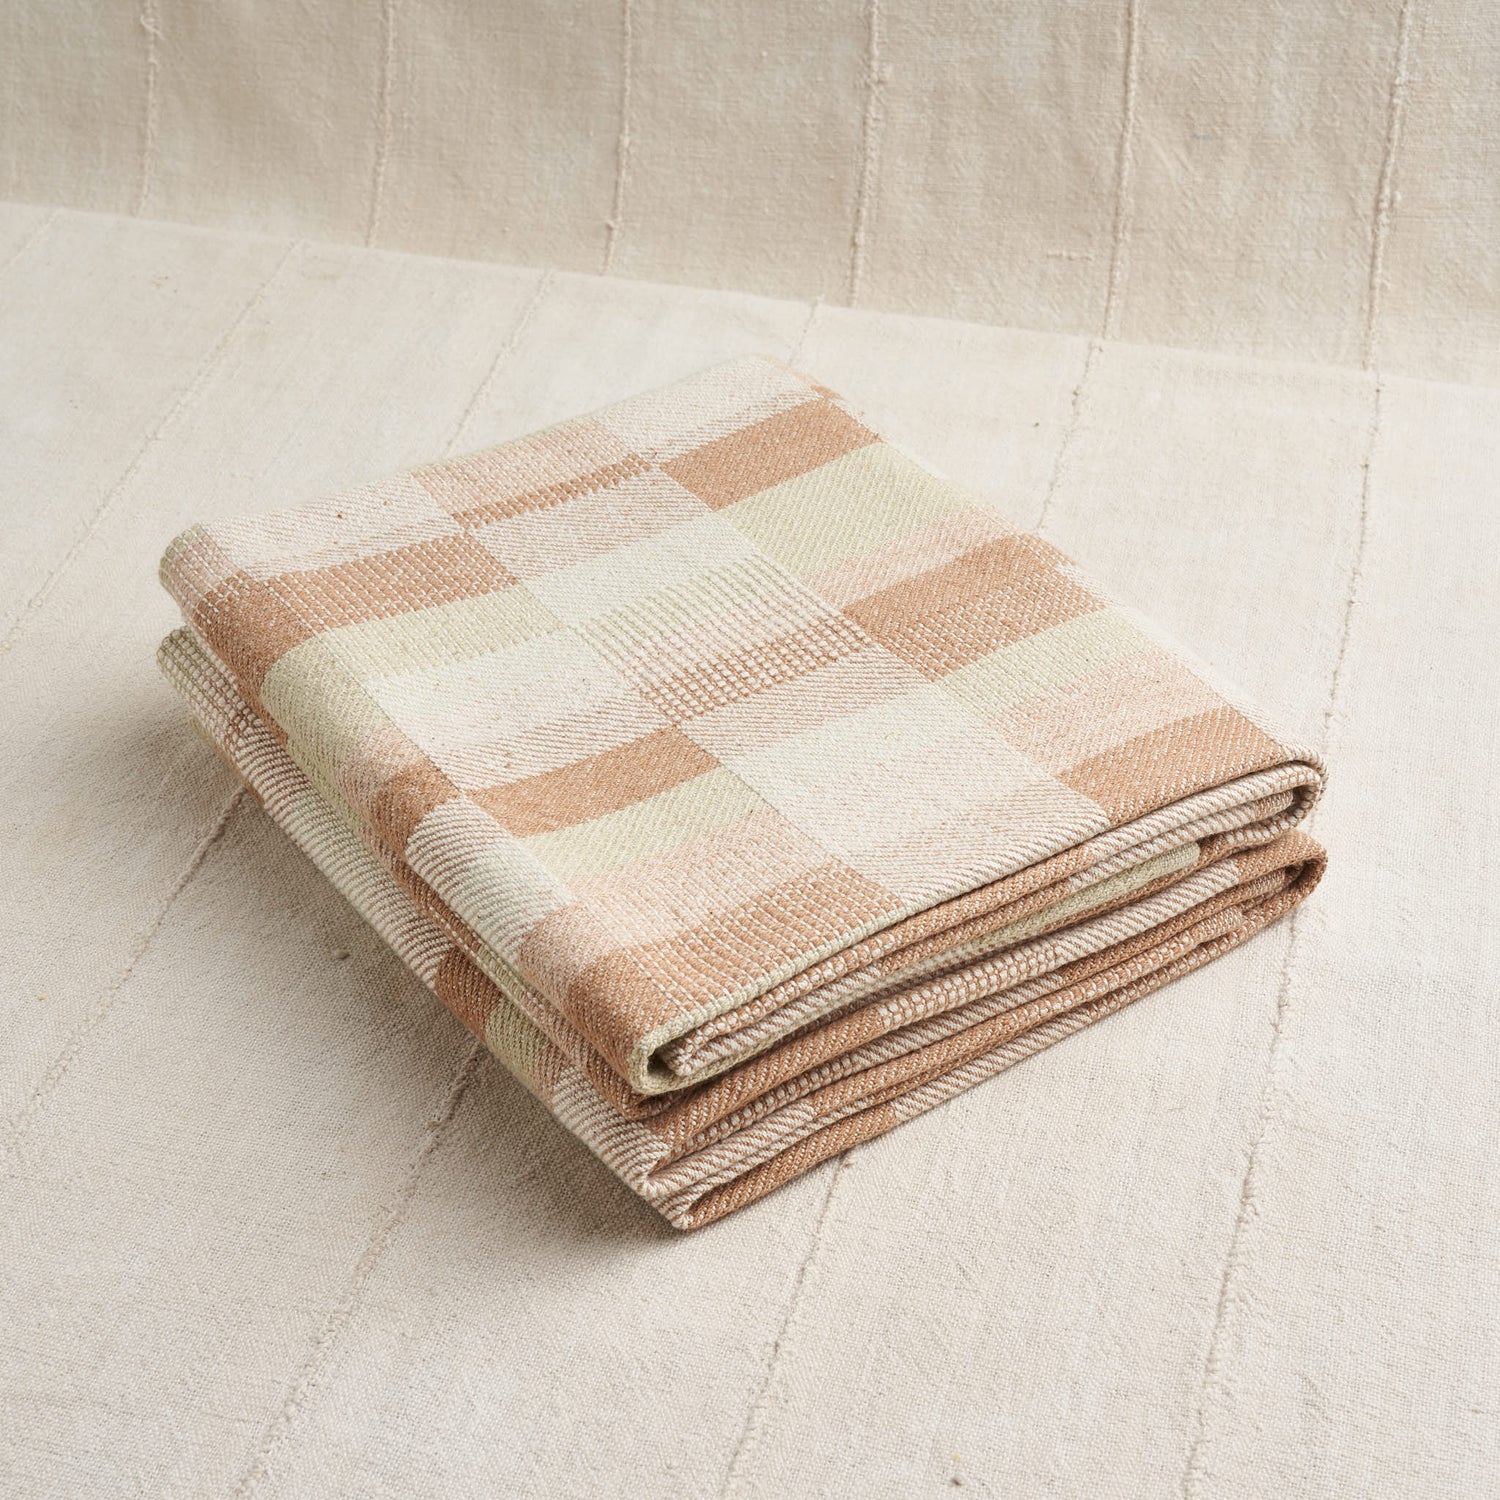 Handwoven Kitchen Towels, Organic Cotton Fall Inspired Towels